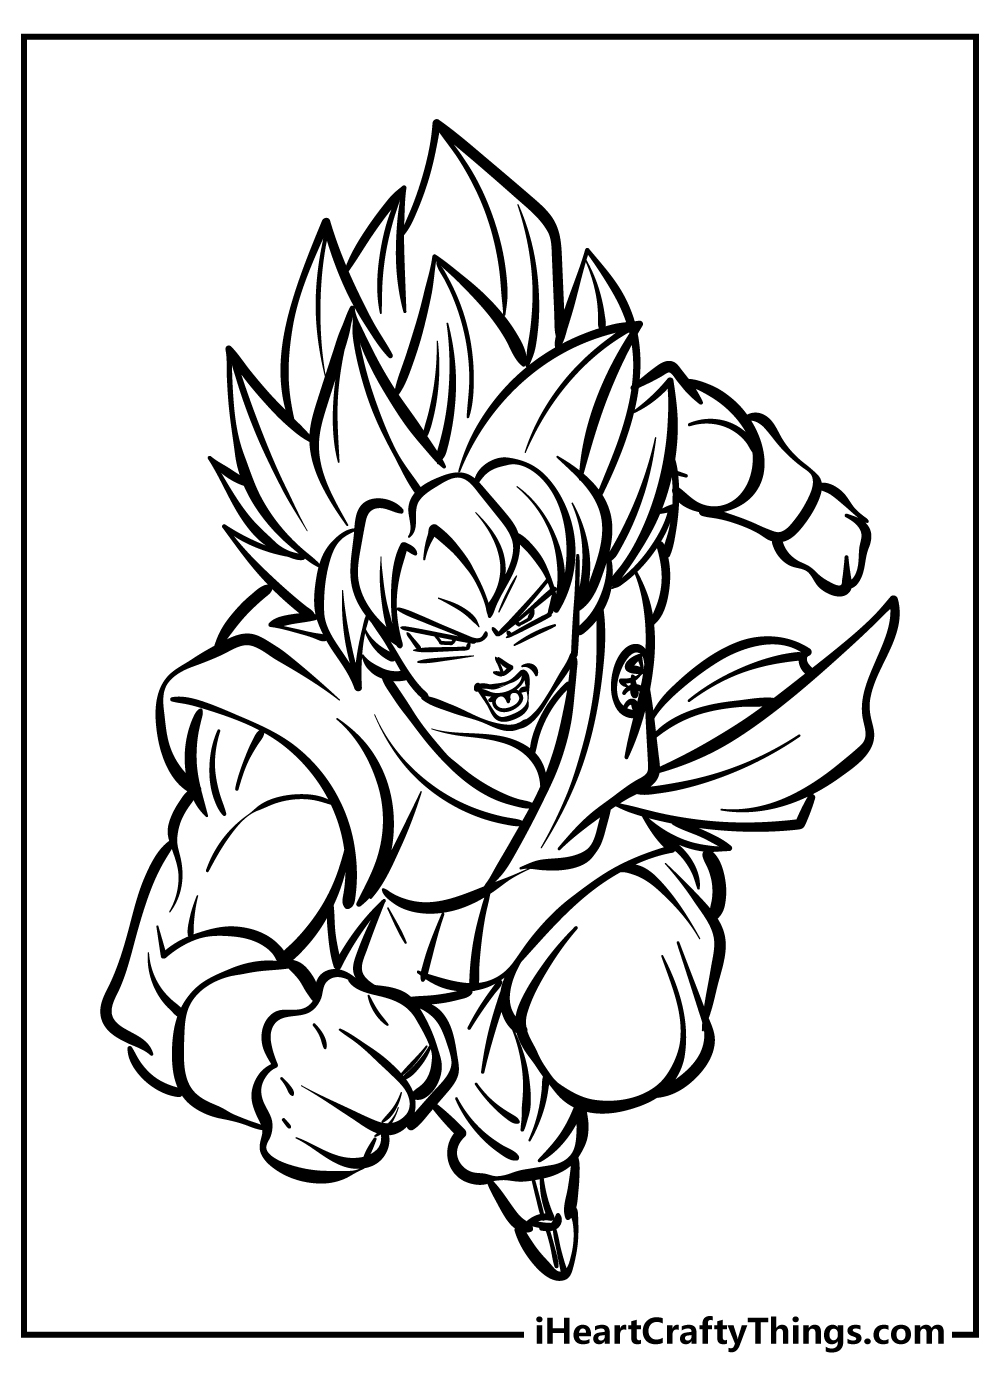 Printable Goku Coloring Pages Updated 20